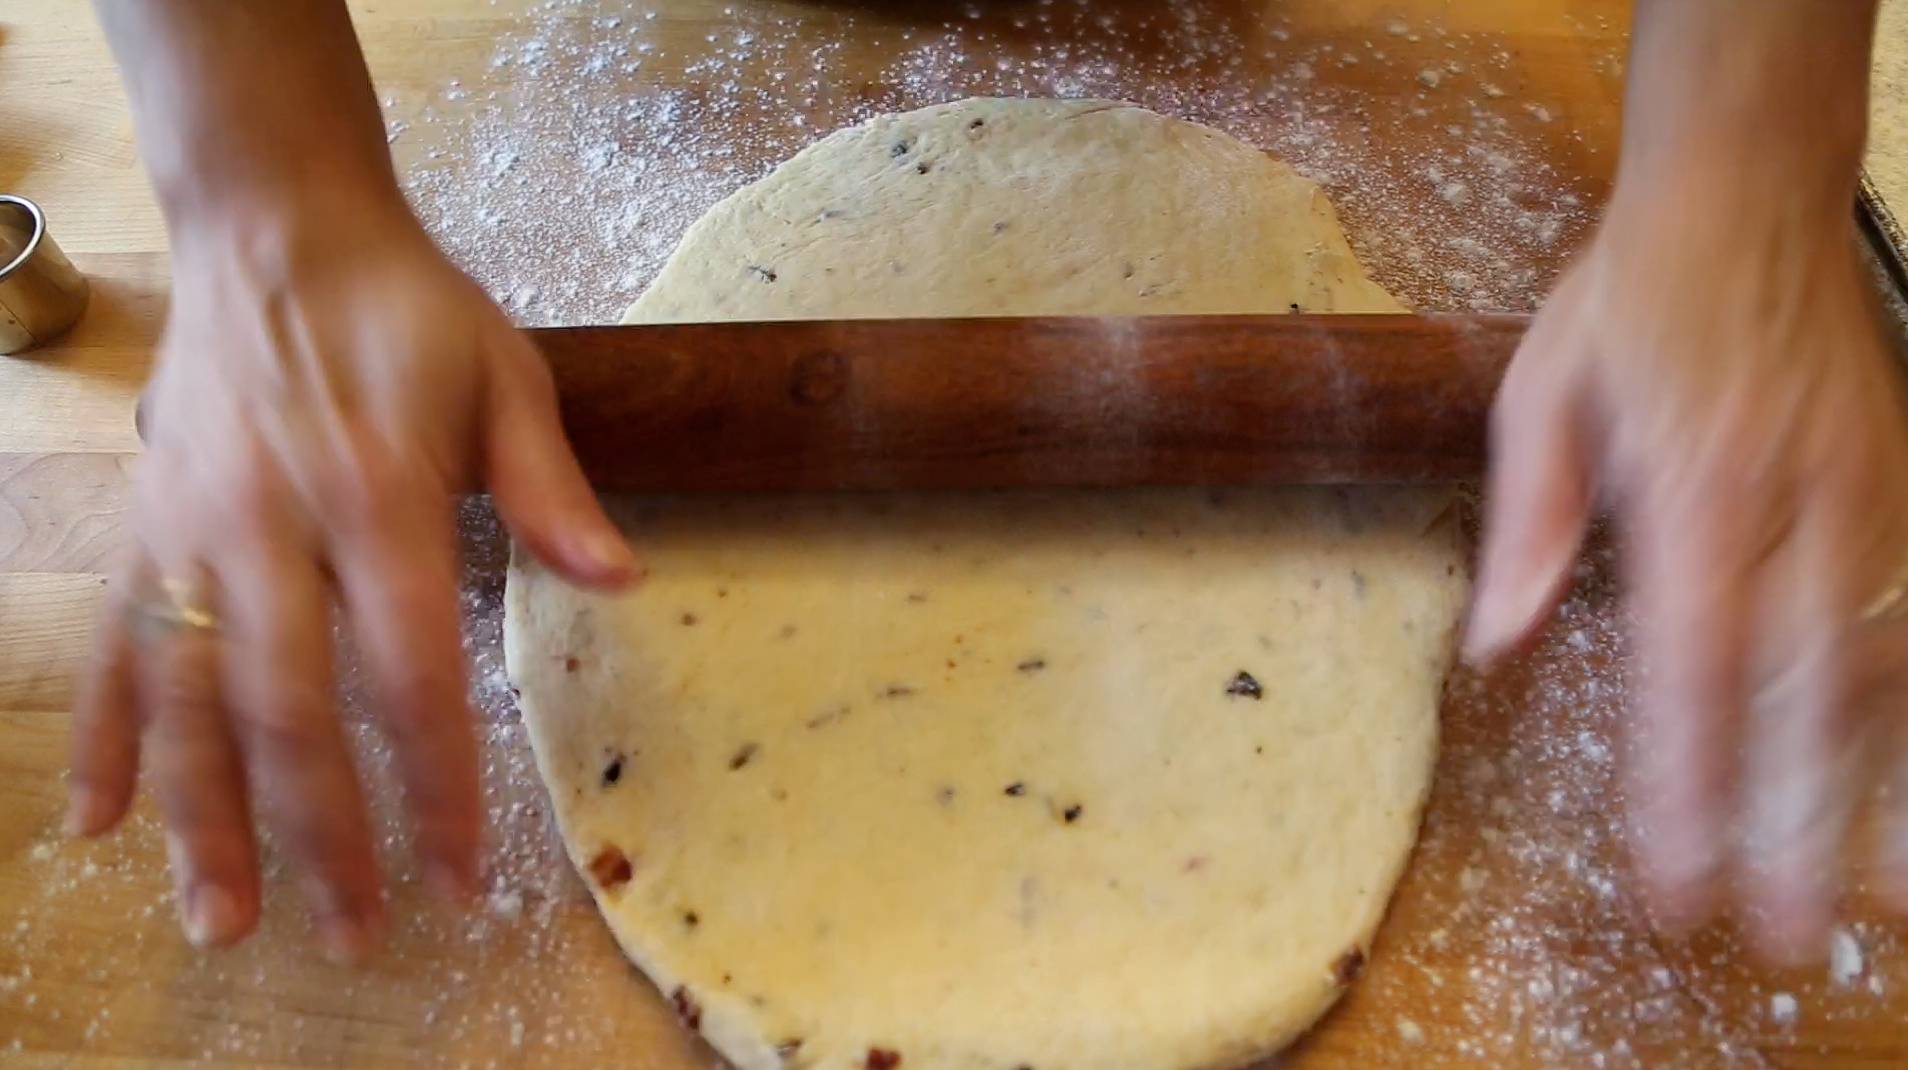 On a floured work surface, roll out the dough to 1/2-inch thick. 